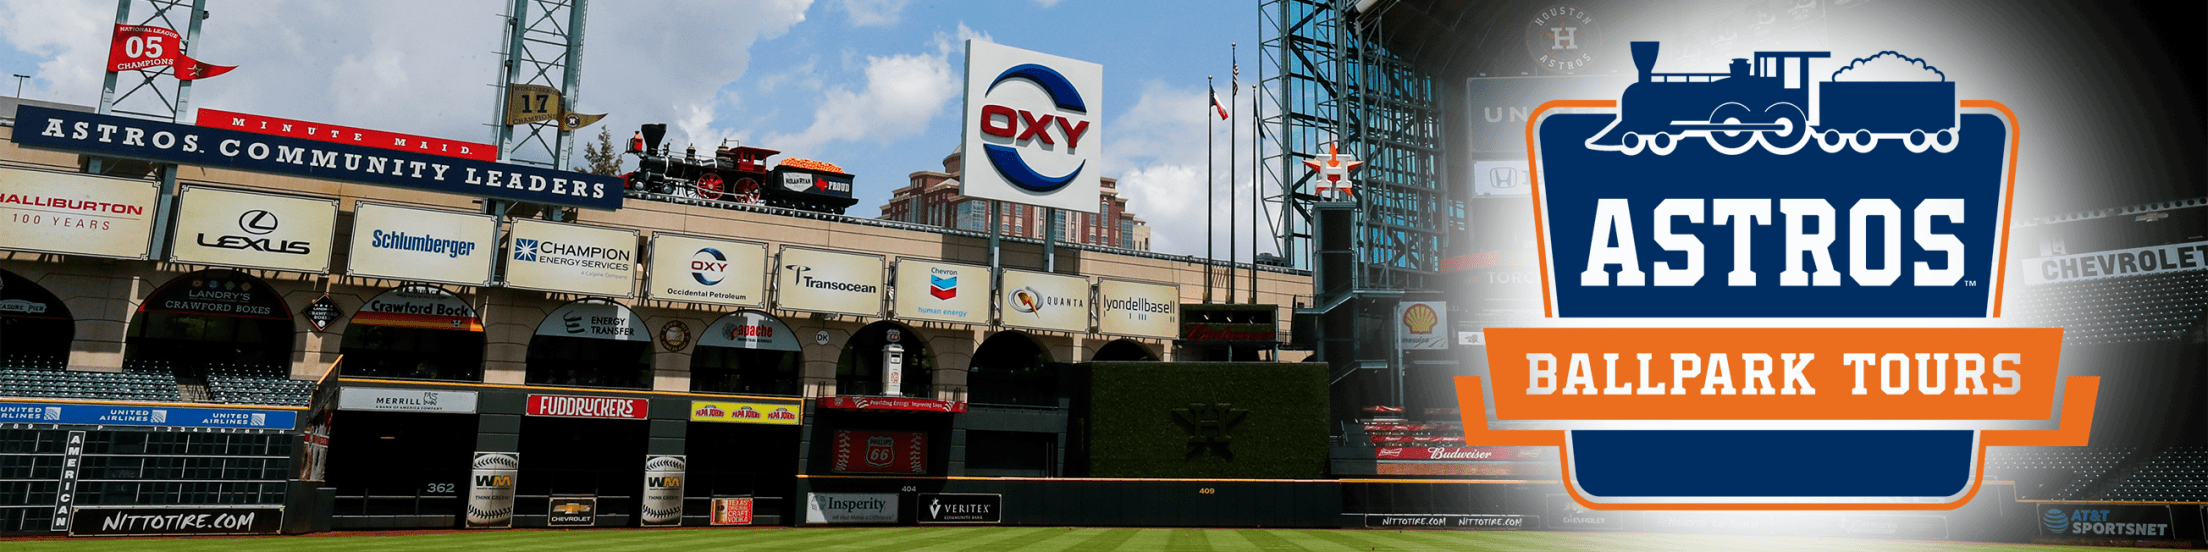 Everything We Learned on a Private Tour of Minute Maid Park